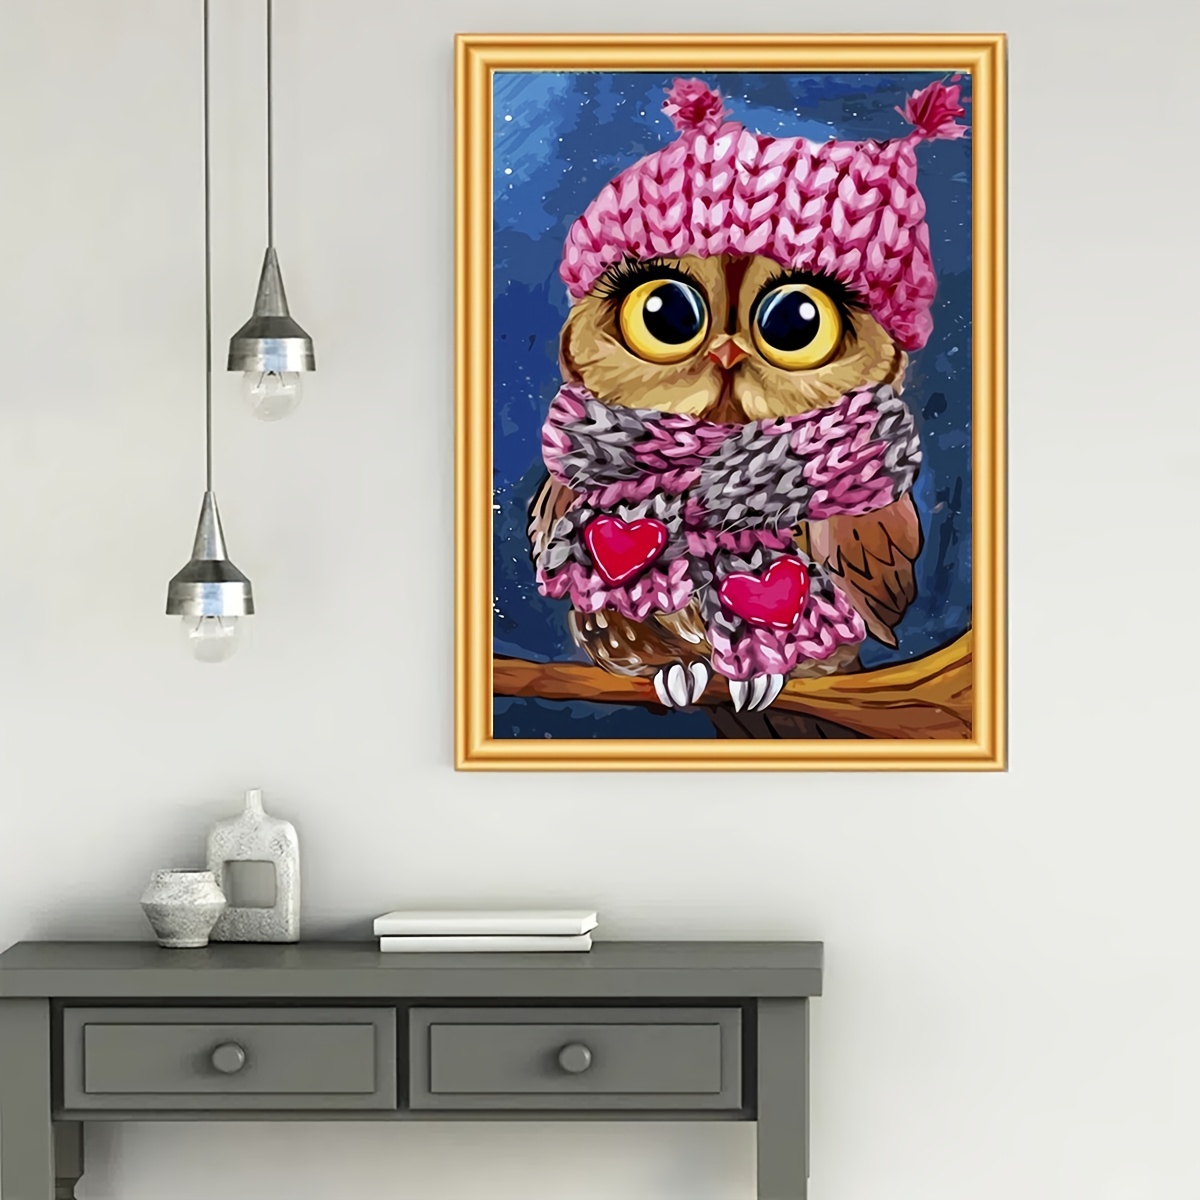 1pc Diamond Painting Kit Handmade DIY Suitable For Adults Beginners Round Diamonds 5D Art Mosaic Owl Gemstone Art Suitable For Family Wall Decoration Gifts Frameless 7 87x11 81in